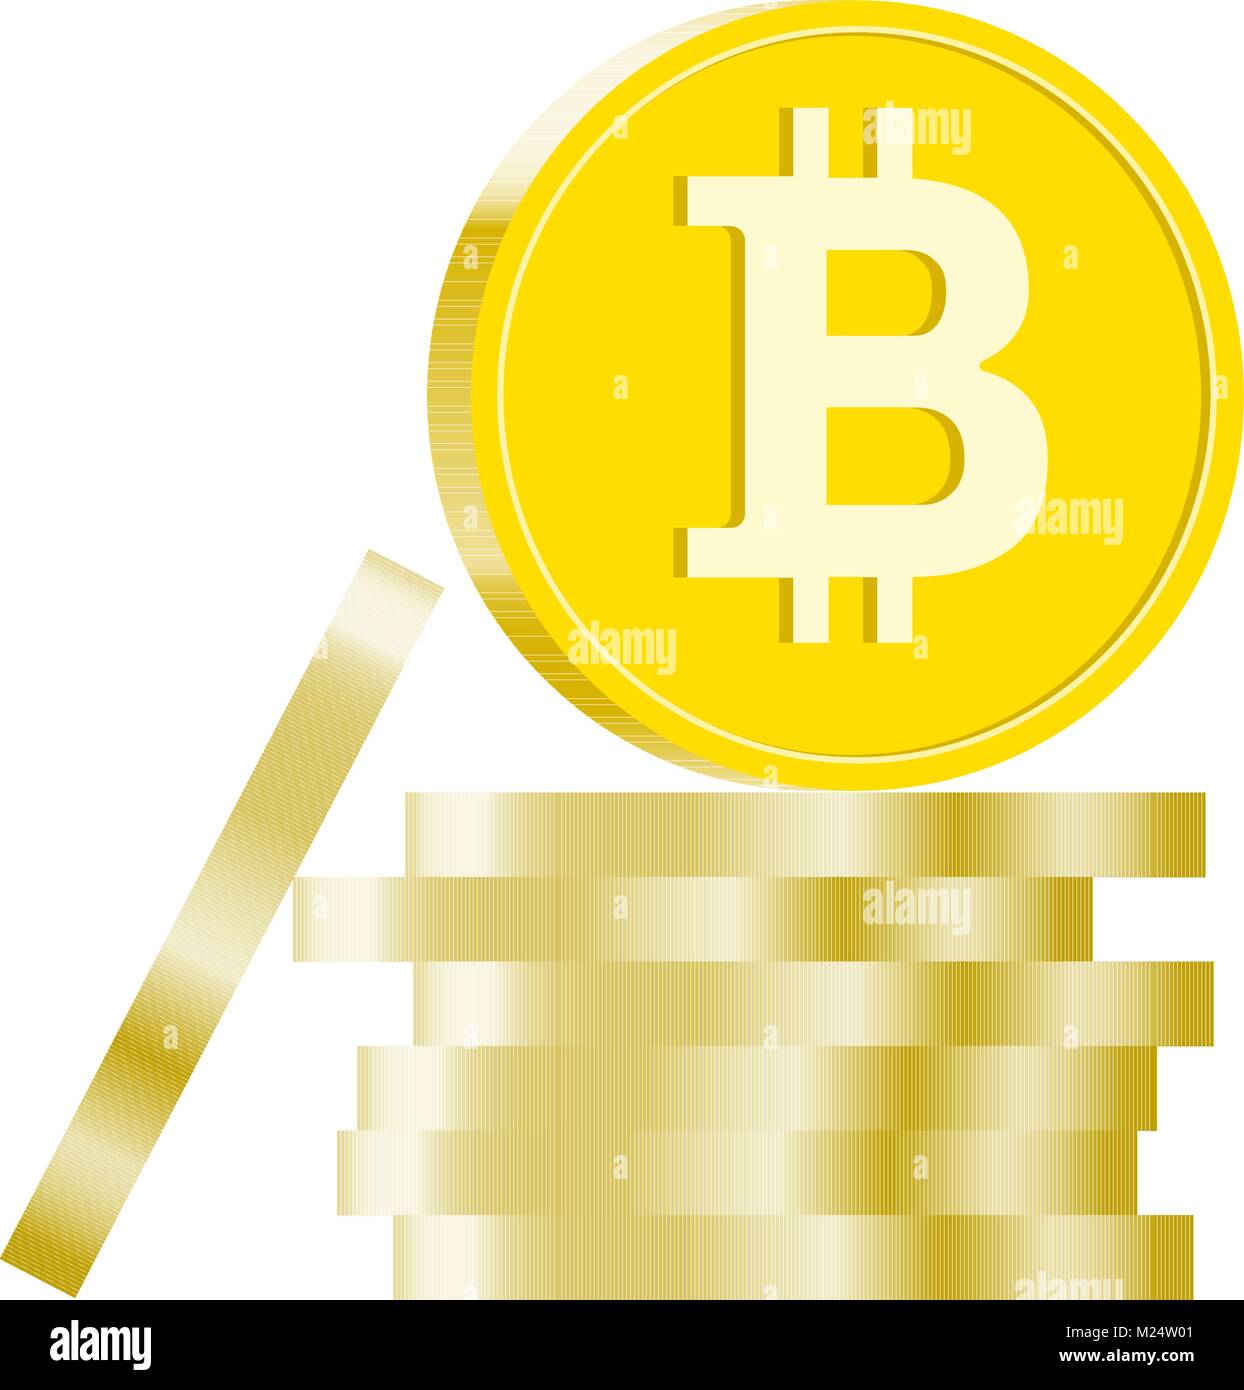 Stack of bitcoins cryptocurrency coins. Vector illustration sign Stock Vector